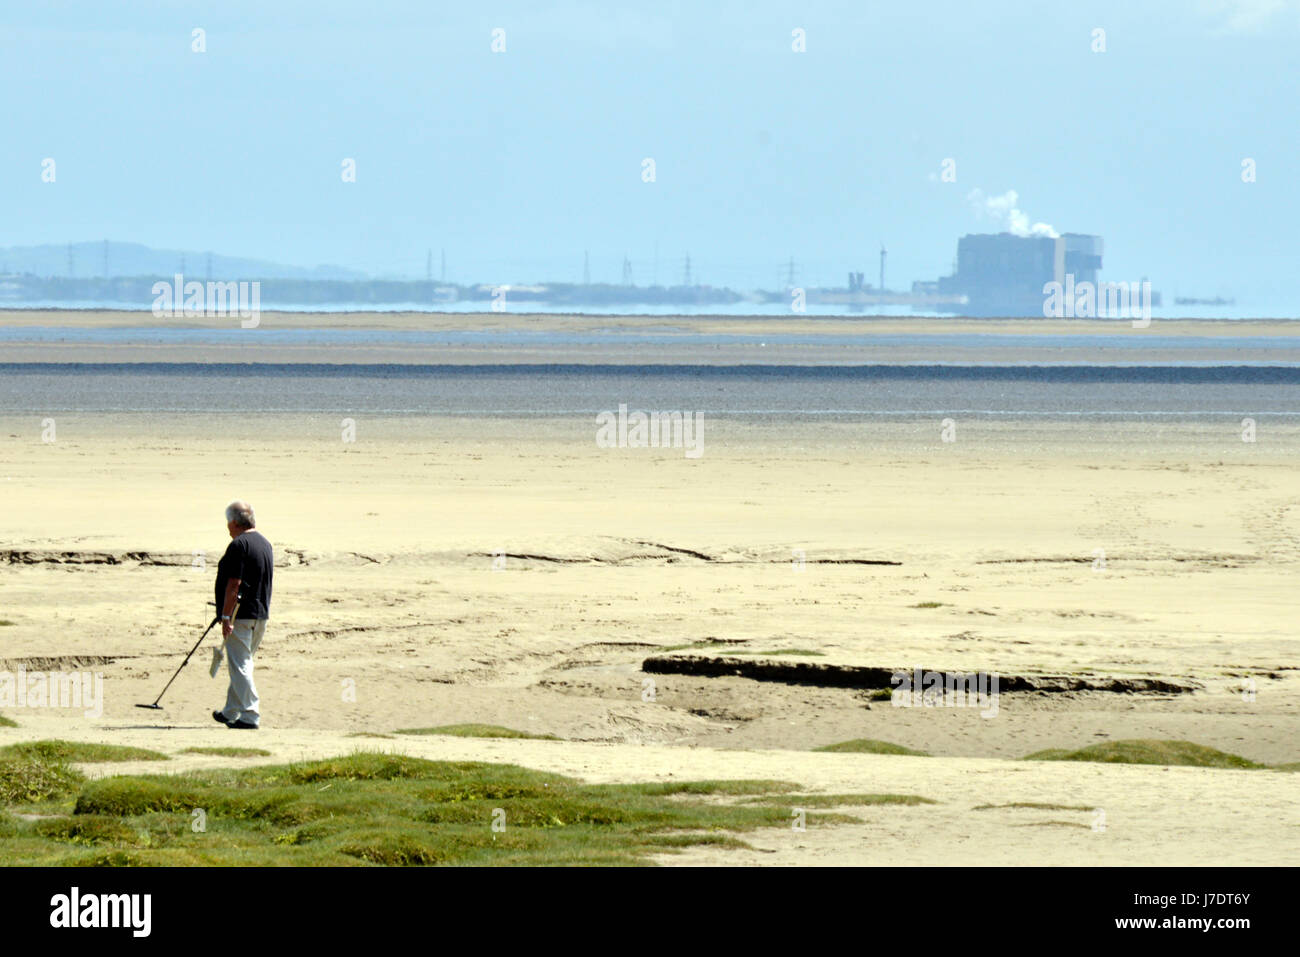 A lone man metal detecting on a desolate beach with a power station in the misty background. Taken at Barrow-in-Furness, looking towards Lancaster, UK. Stock Photo